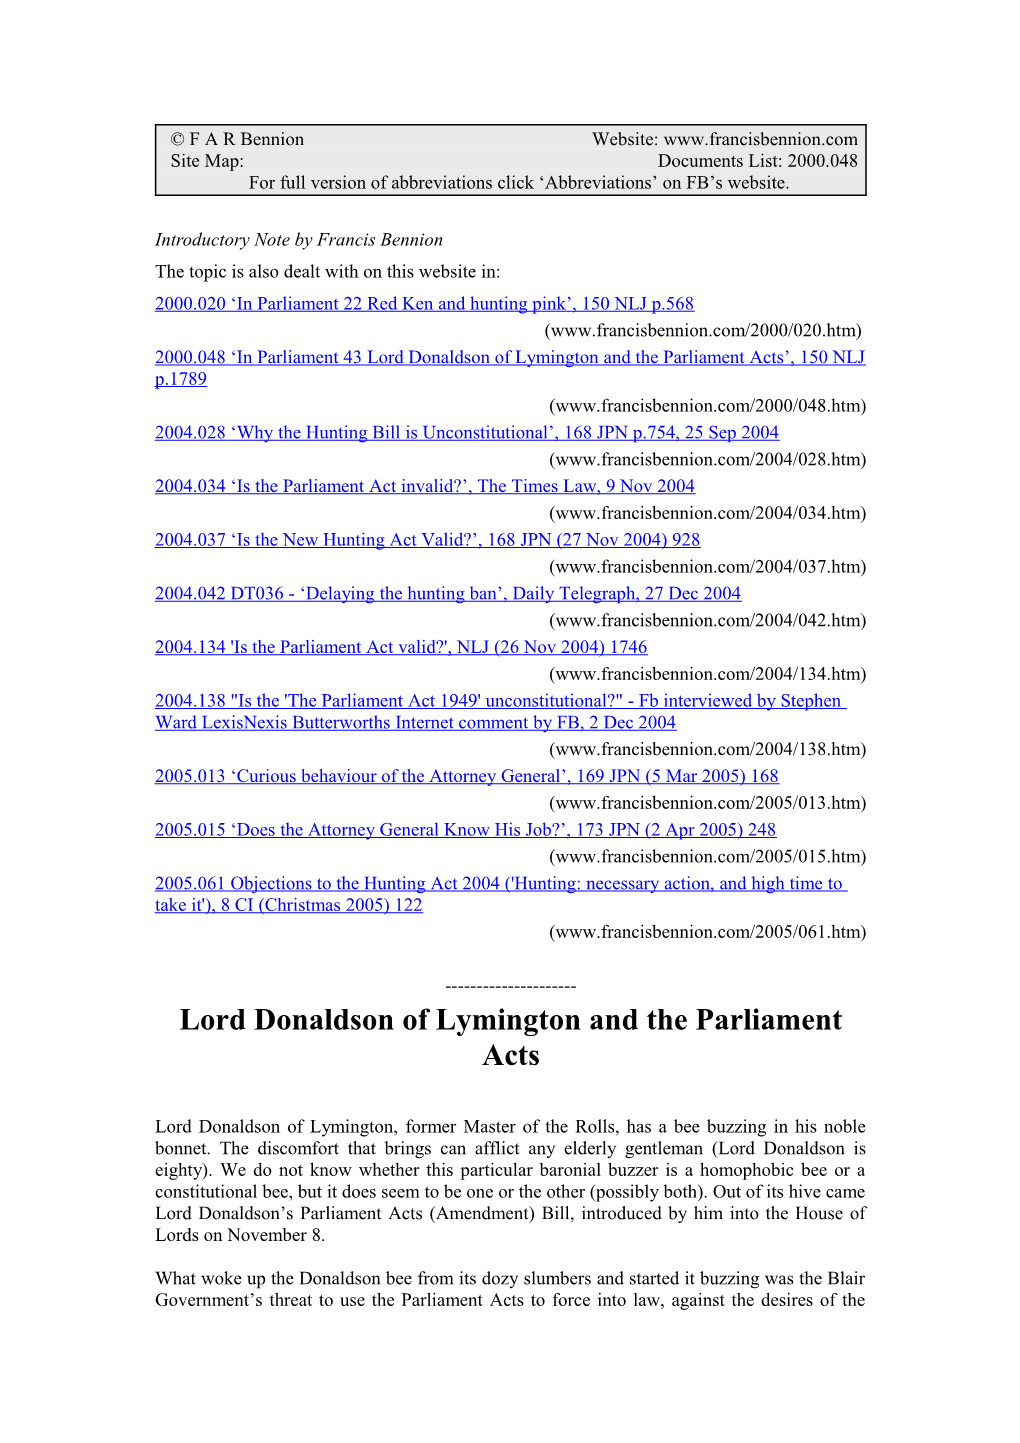 Lord Donaldson and the Parliament Acts